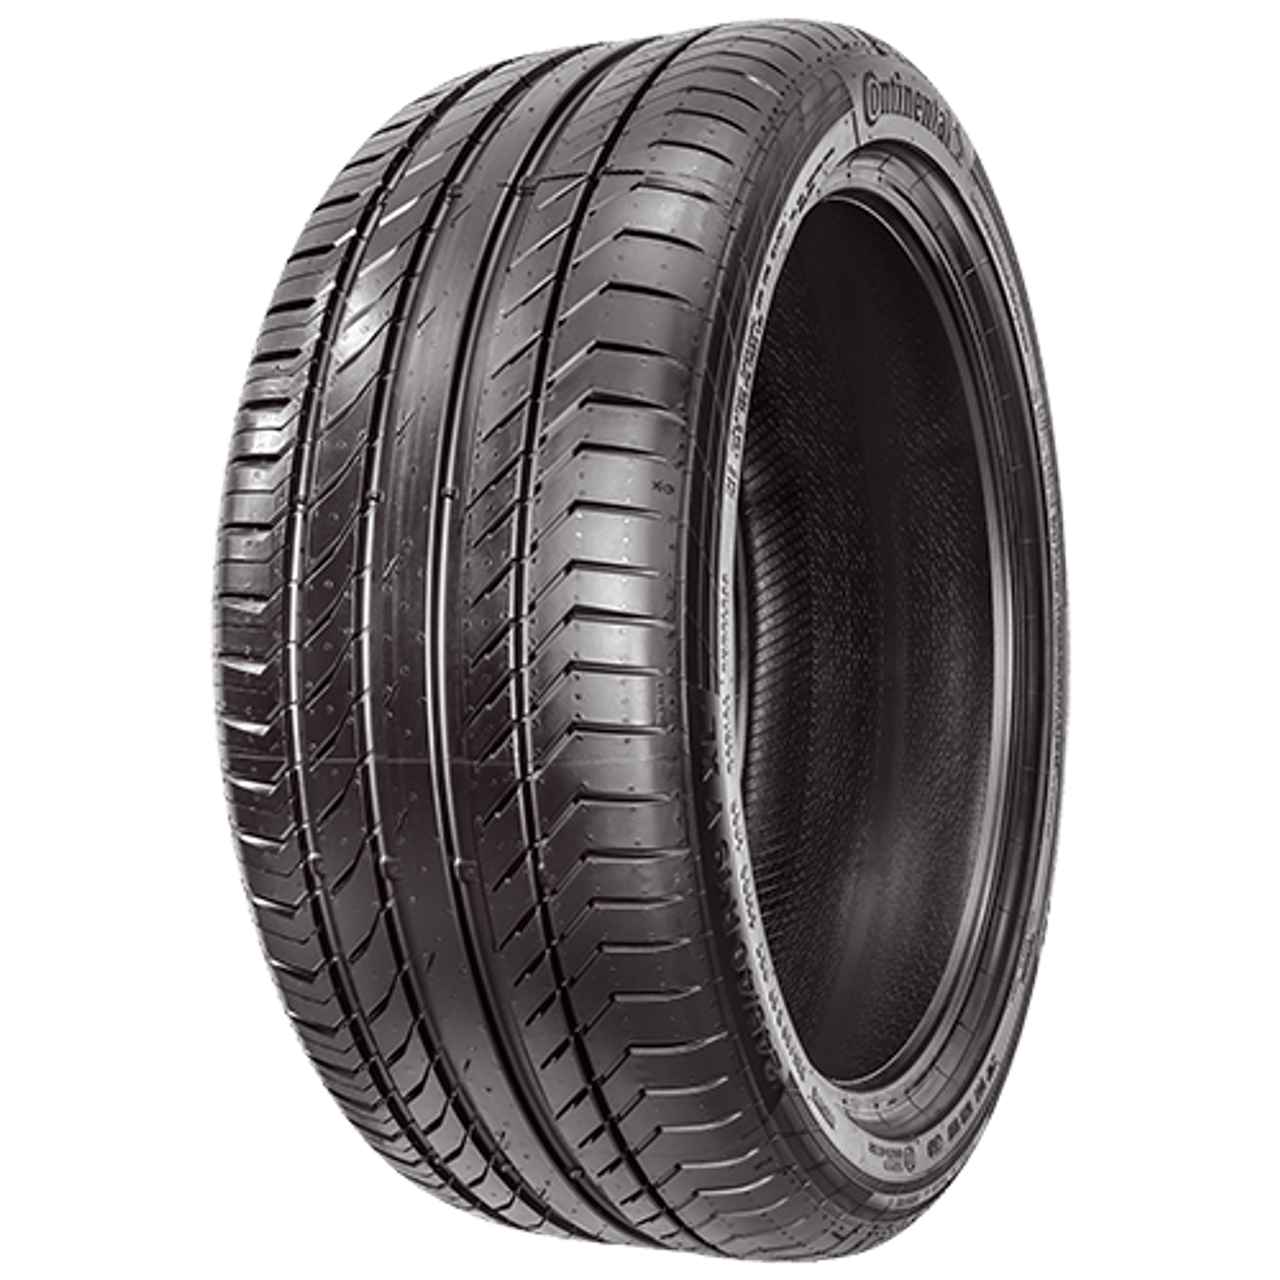 CONTINENTAL CONTISPORTCONTACT 5 (MO) 245/40R17 91W FR